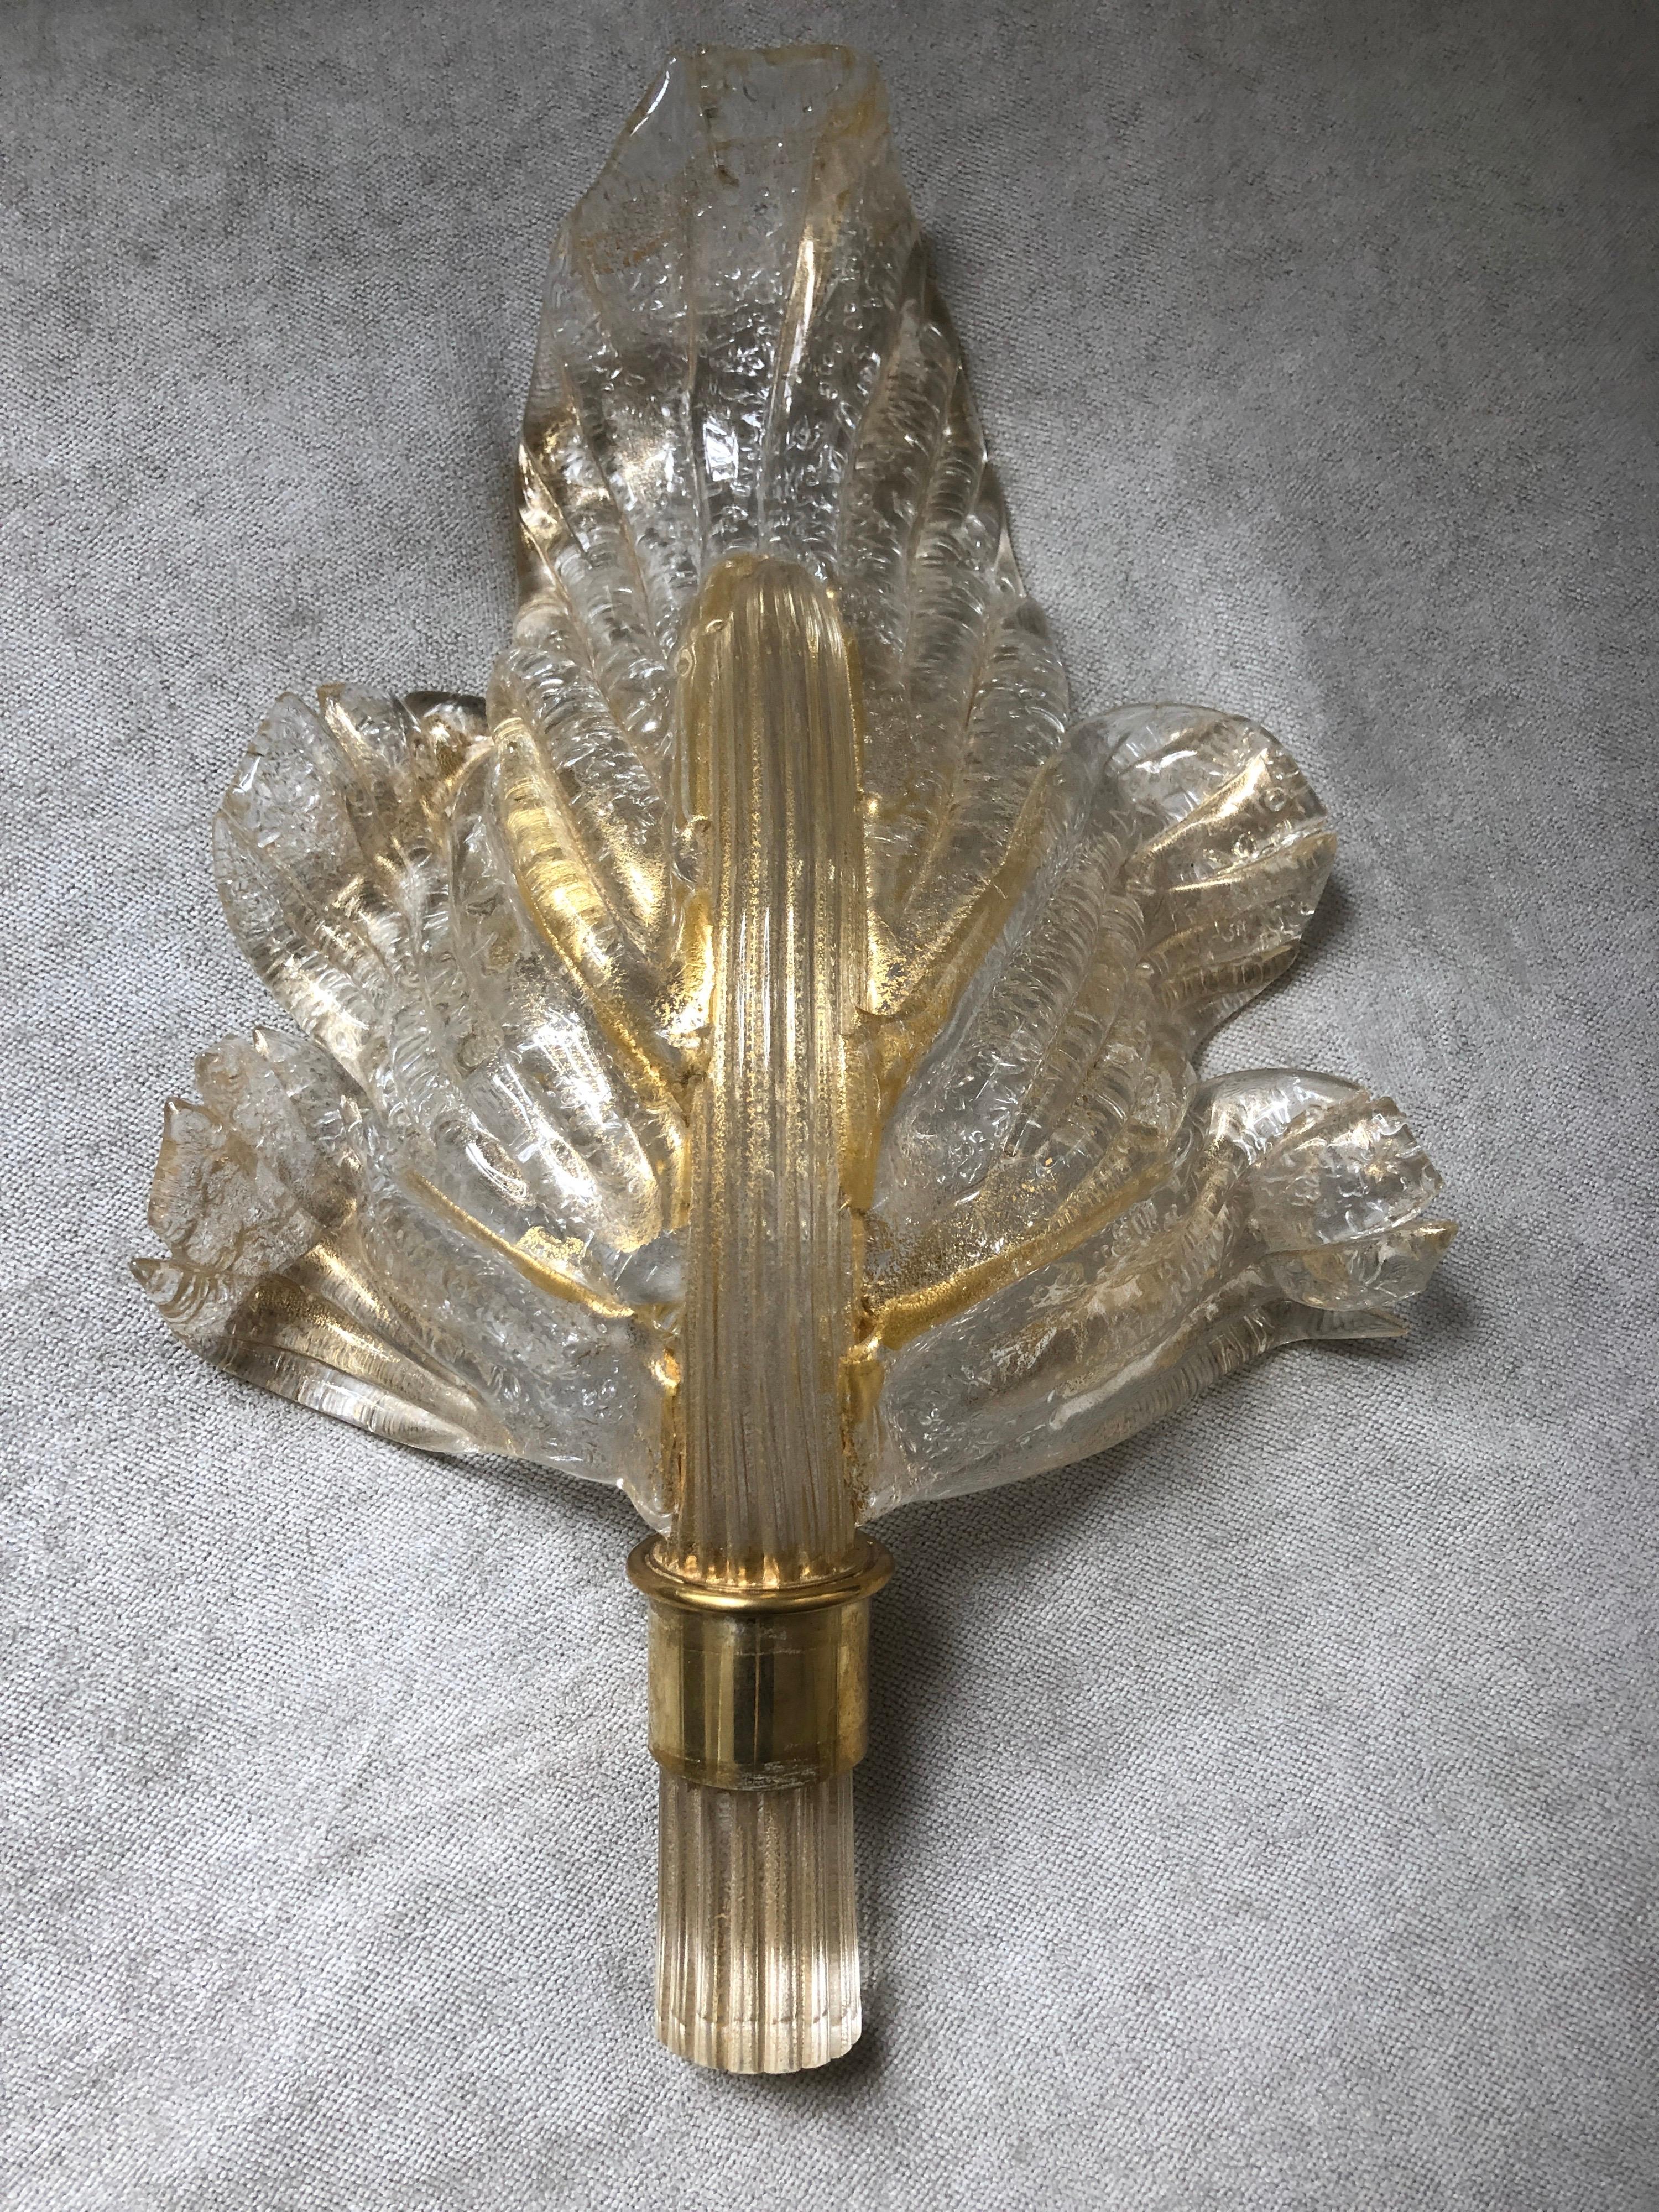 Beautiful and original Italian Venetian pair of Murano 24-karat gold flaked crystal glass wall lights leaf form manufactured by Seguso from 1950s.
This splendid reverse side of the glass in the 